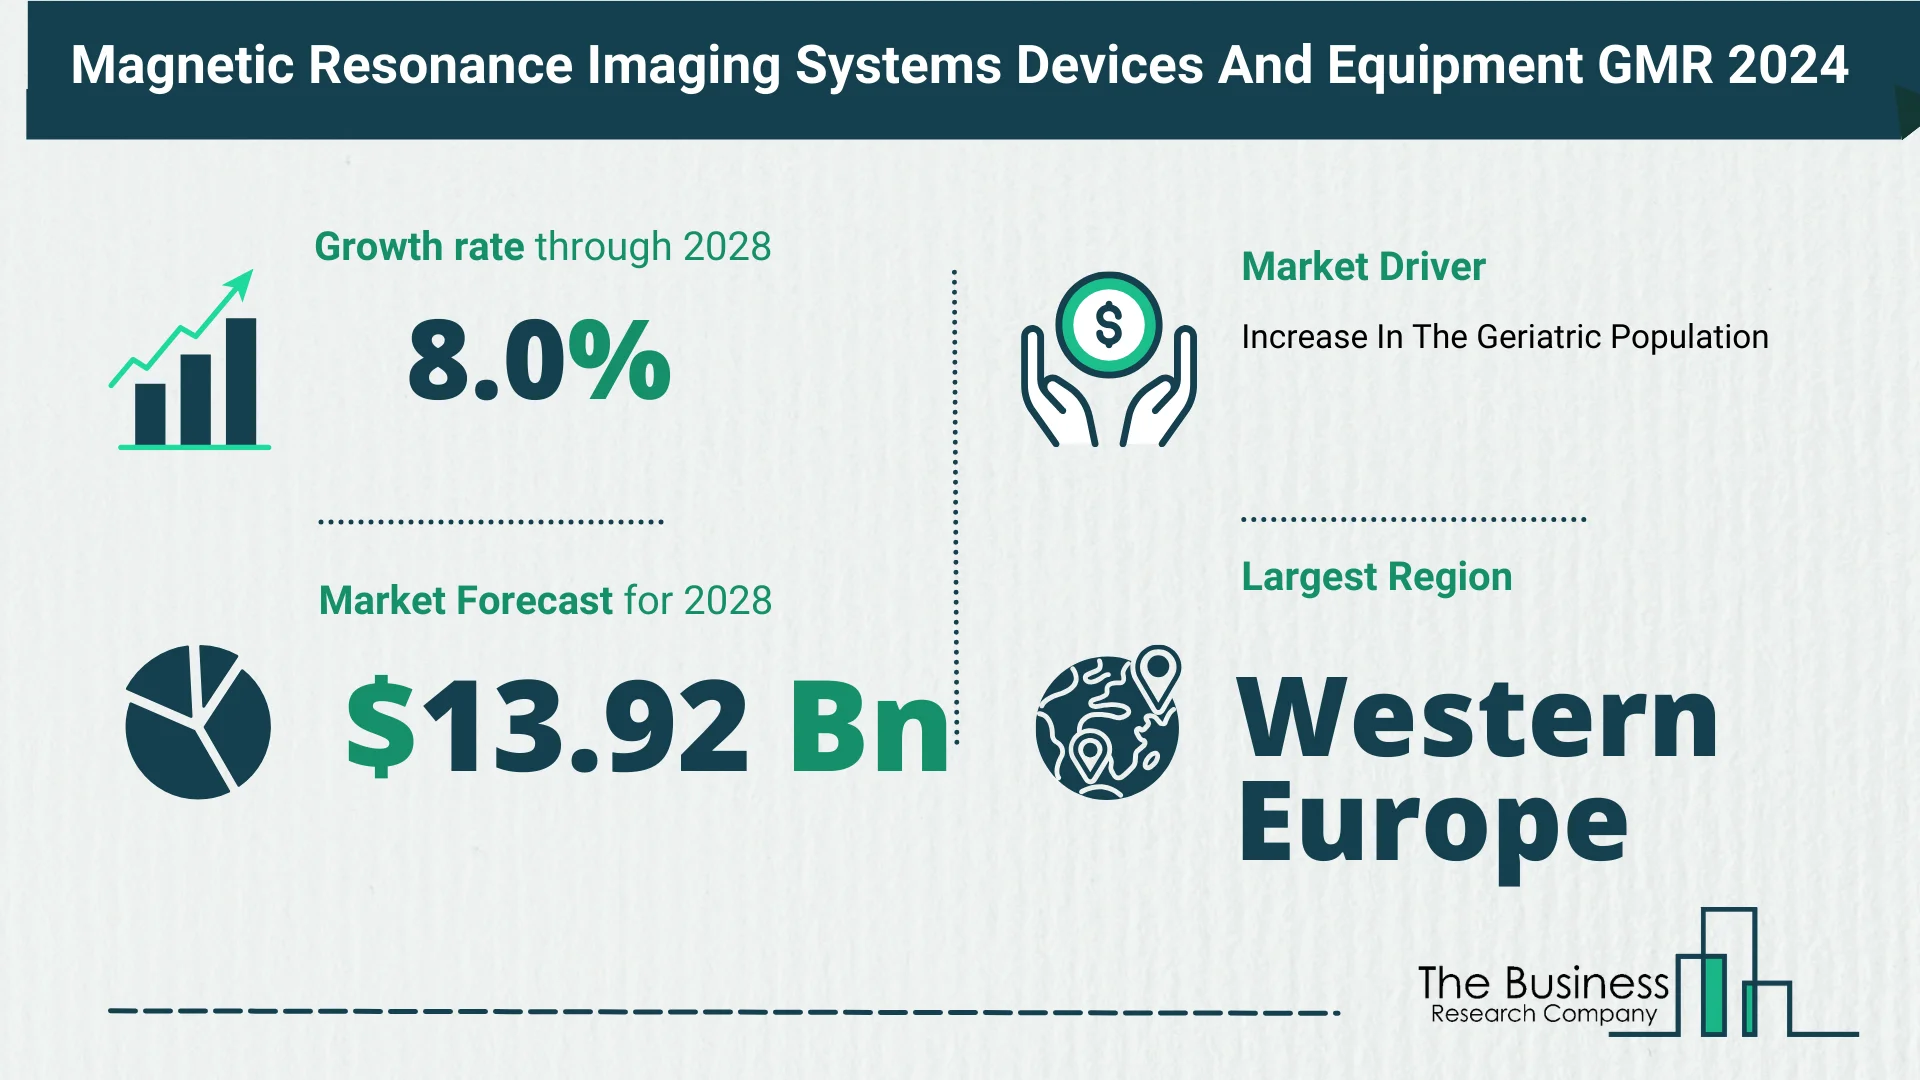 Global Magnetic Resonance Imaging Systems Devices And Equipment Market Overview 2024: Size, Drivers, And Trends